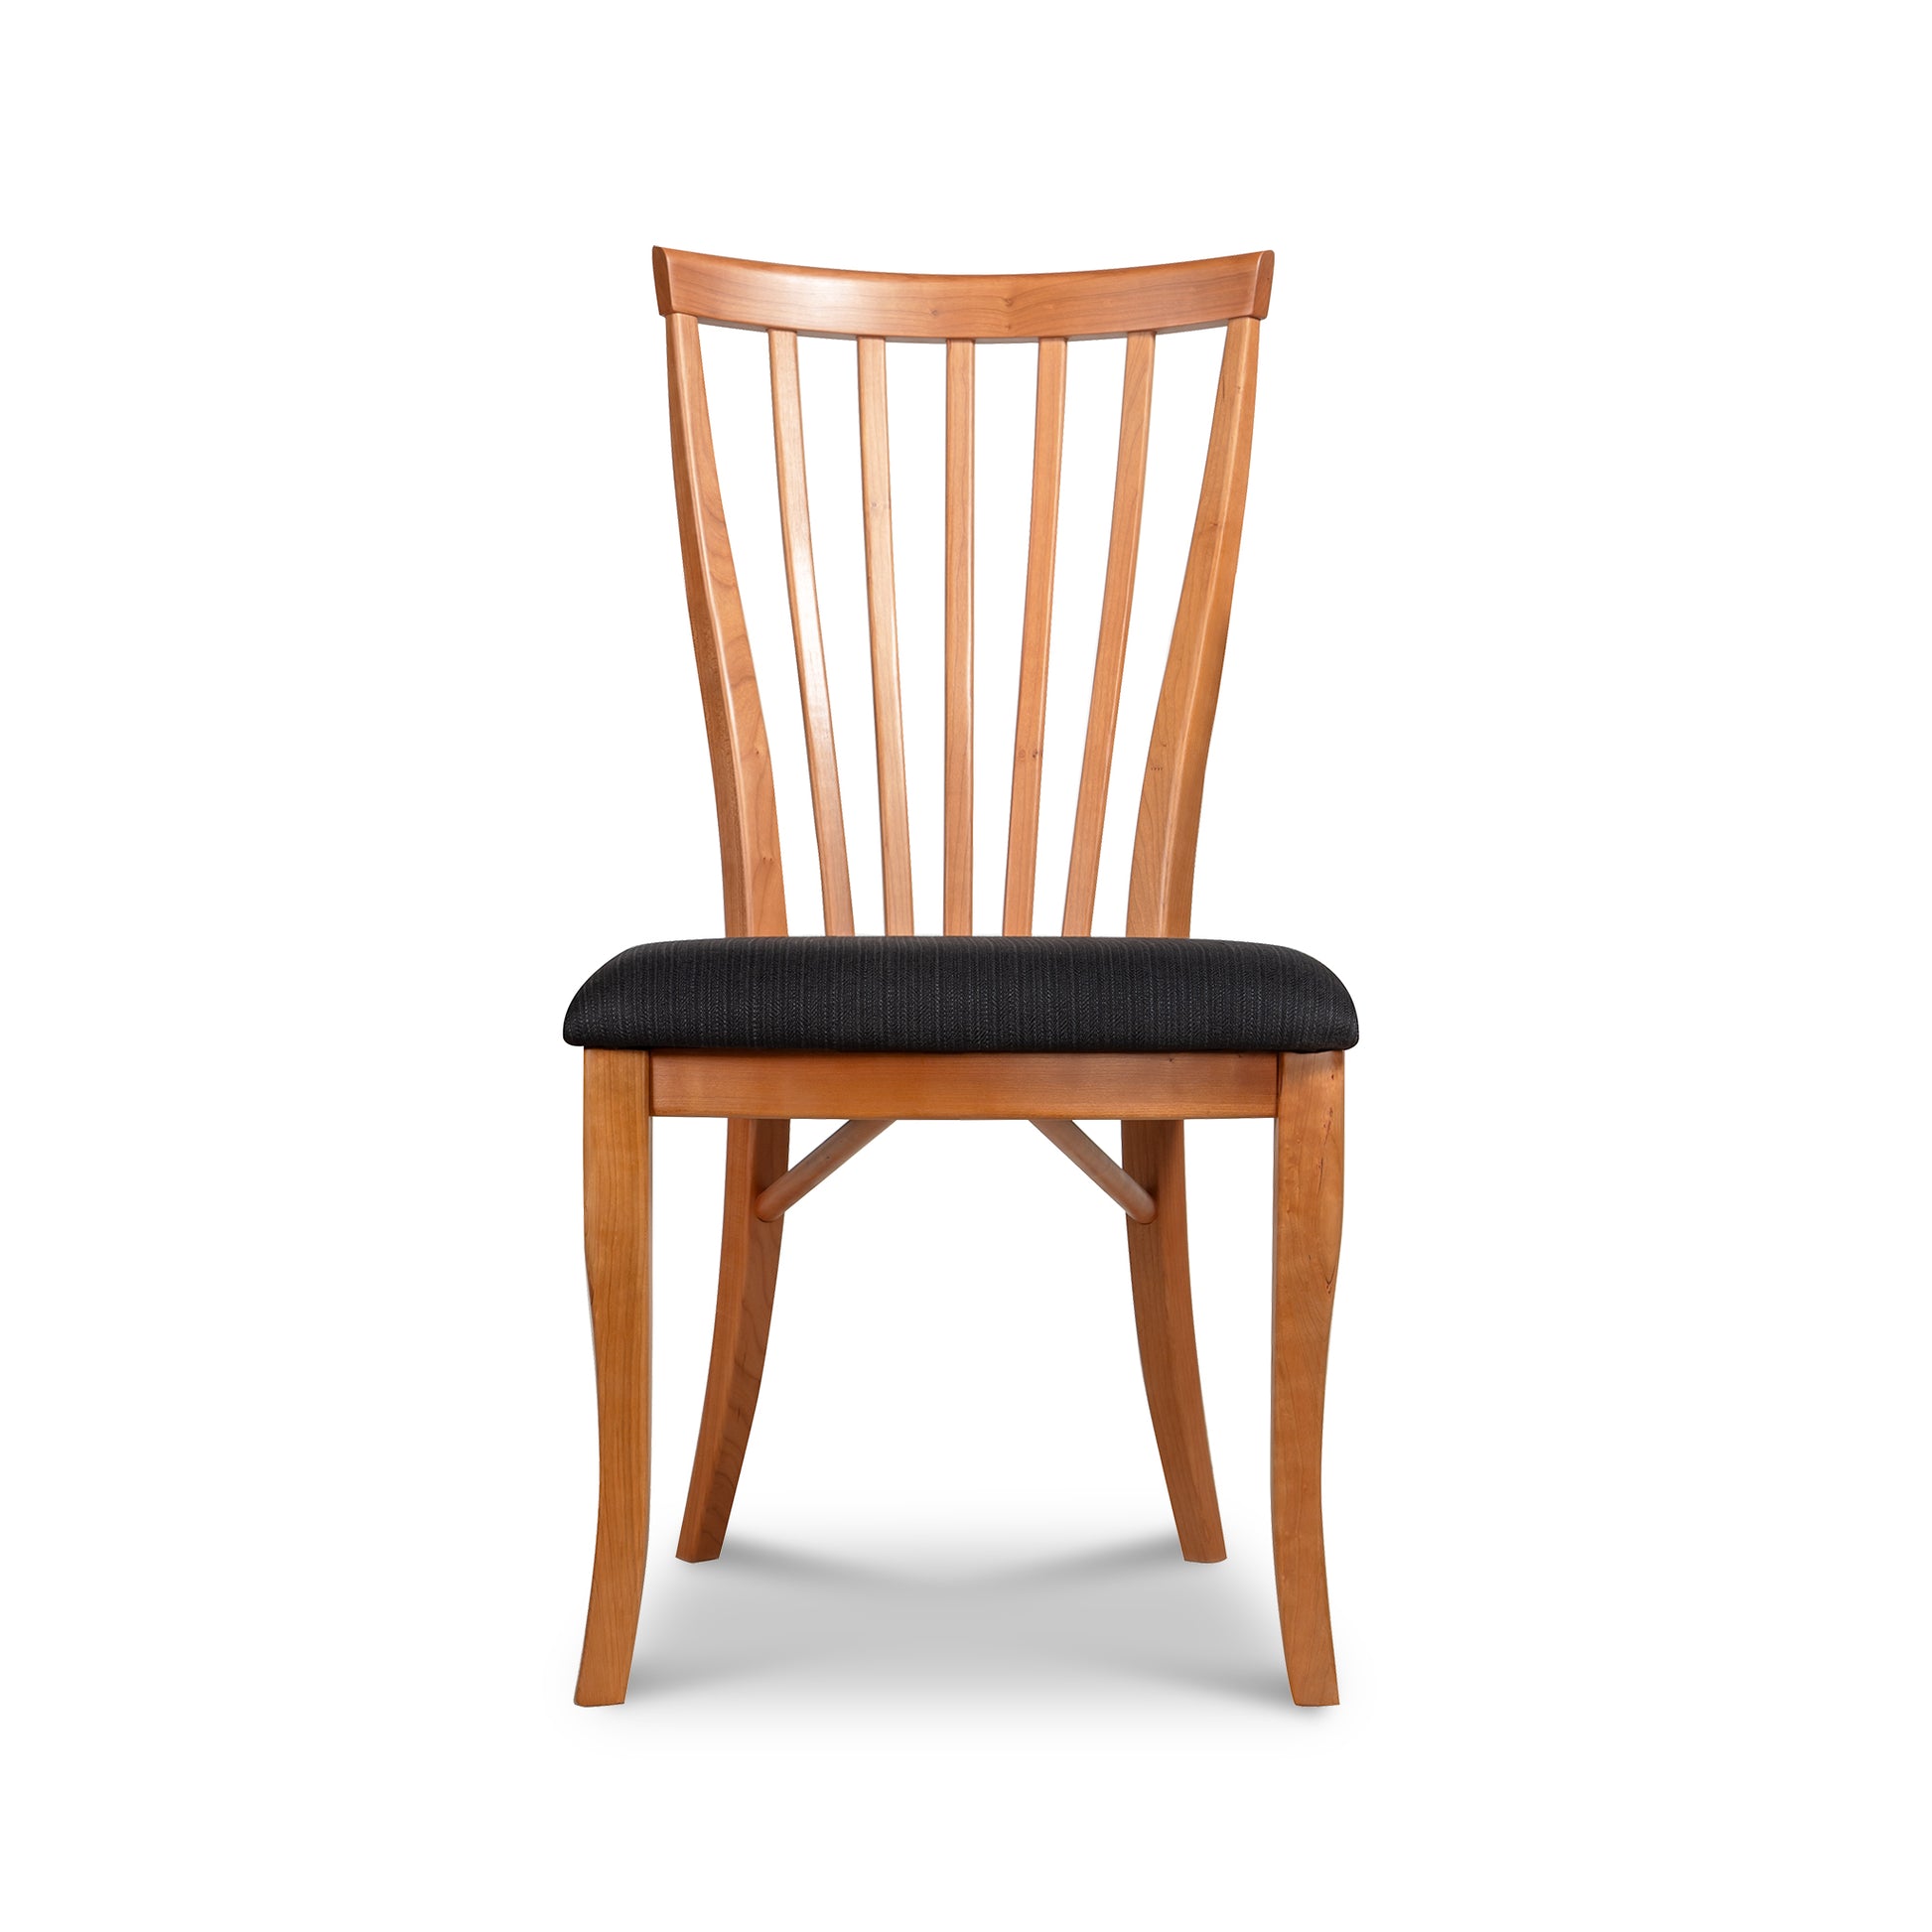 A Classic Shaker dining chair made from natural hardwoods, the Classic Shaker Chair #1 by Lyndon Furniture.